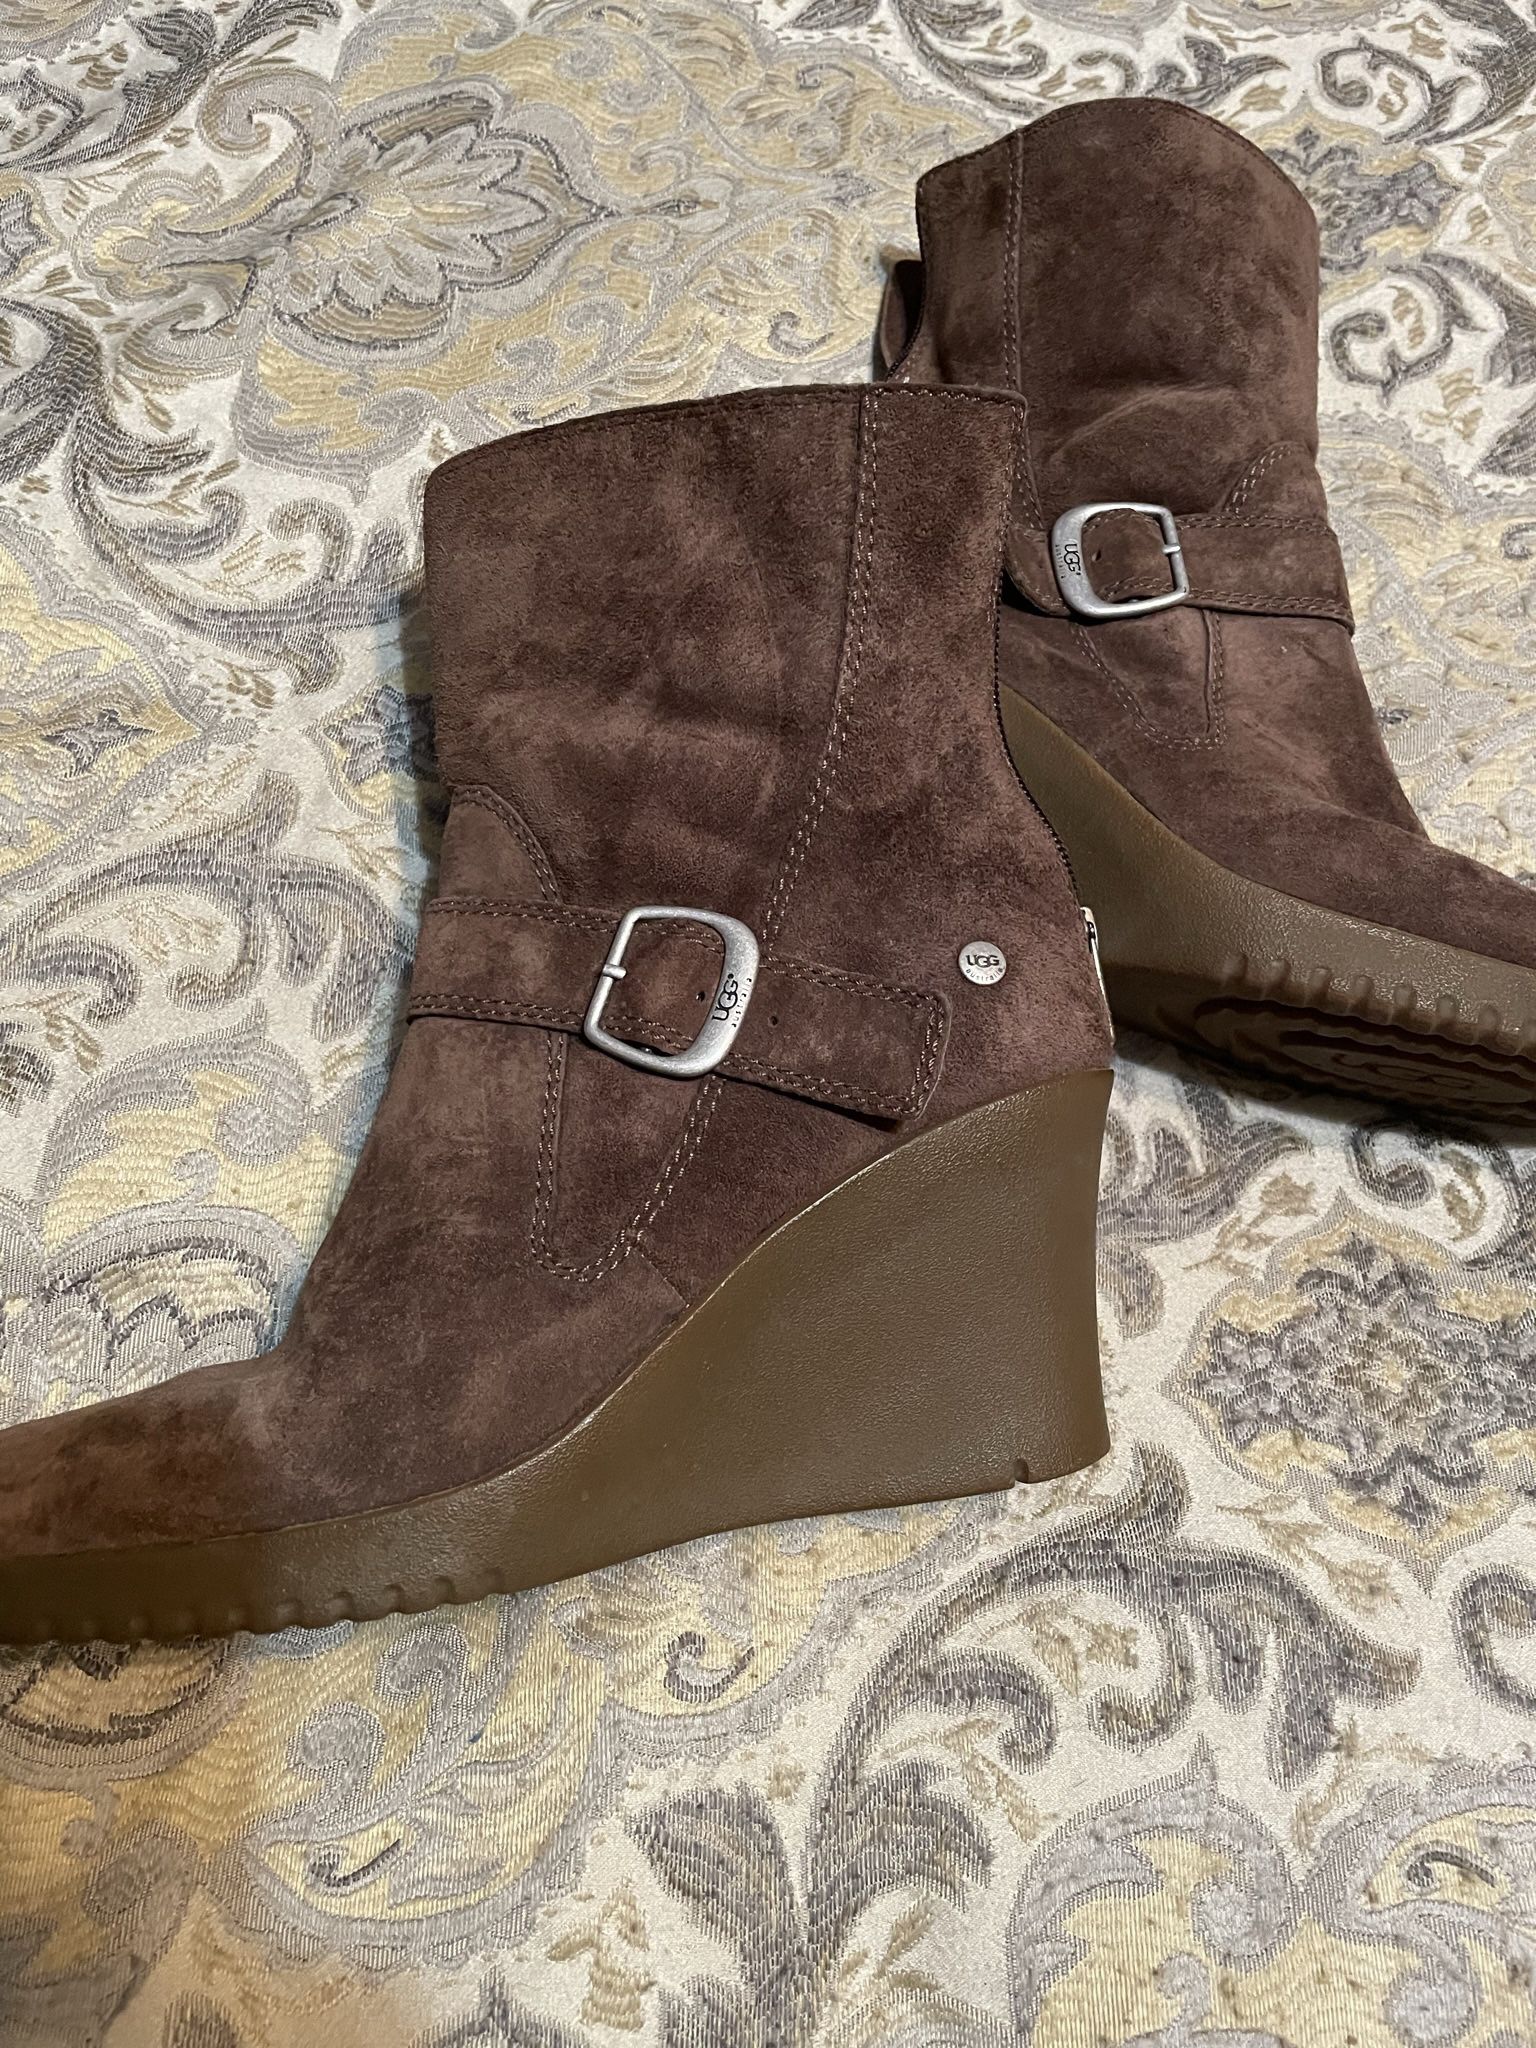 Womens Authentic UGG Boots Size 8